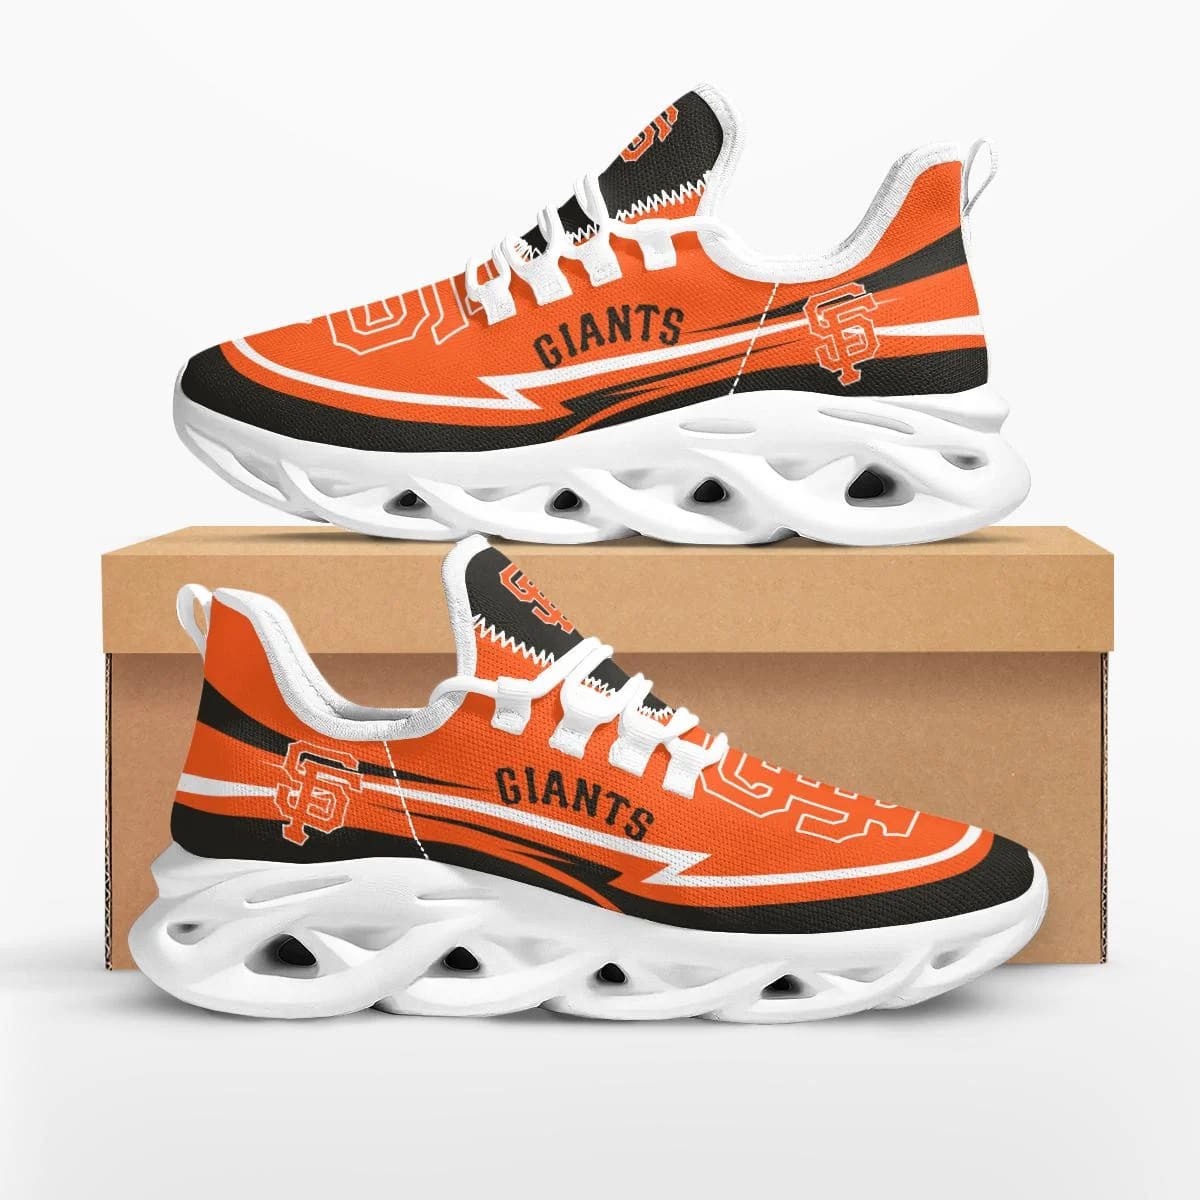 MLB San Francisco Giants Are Coming Curves Max Soul Shoes Fynocd.jpg